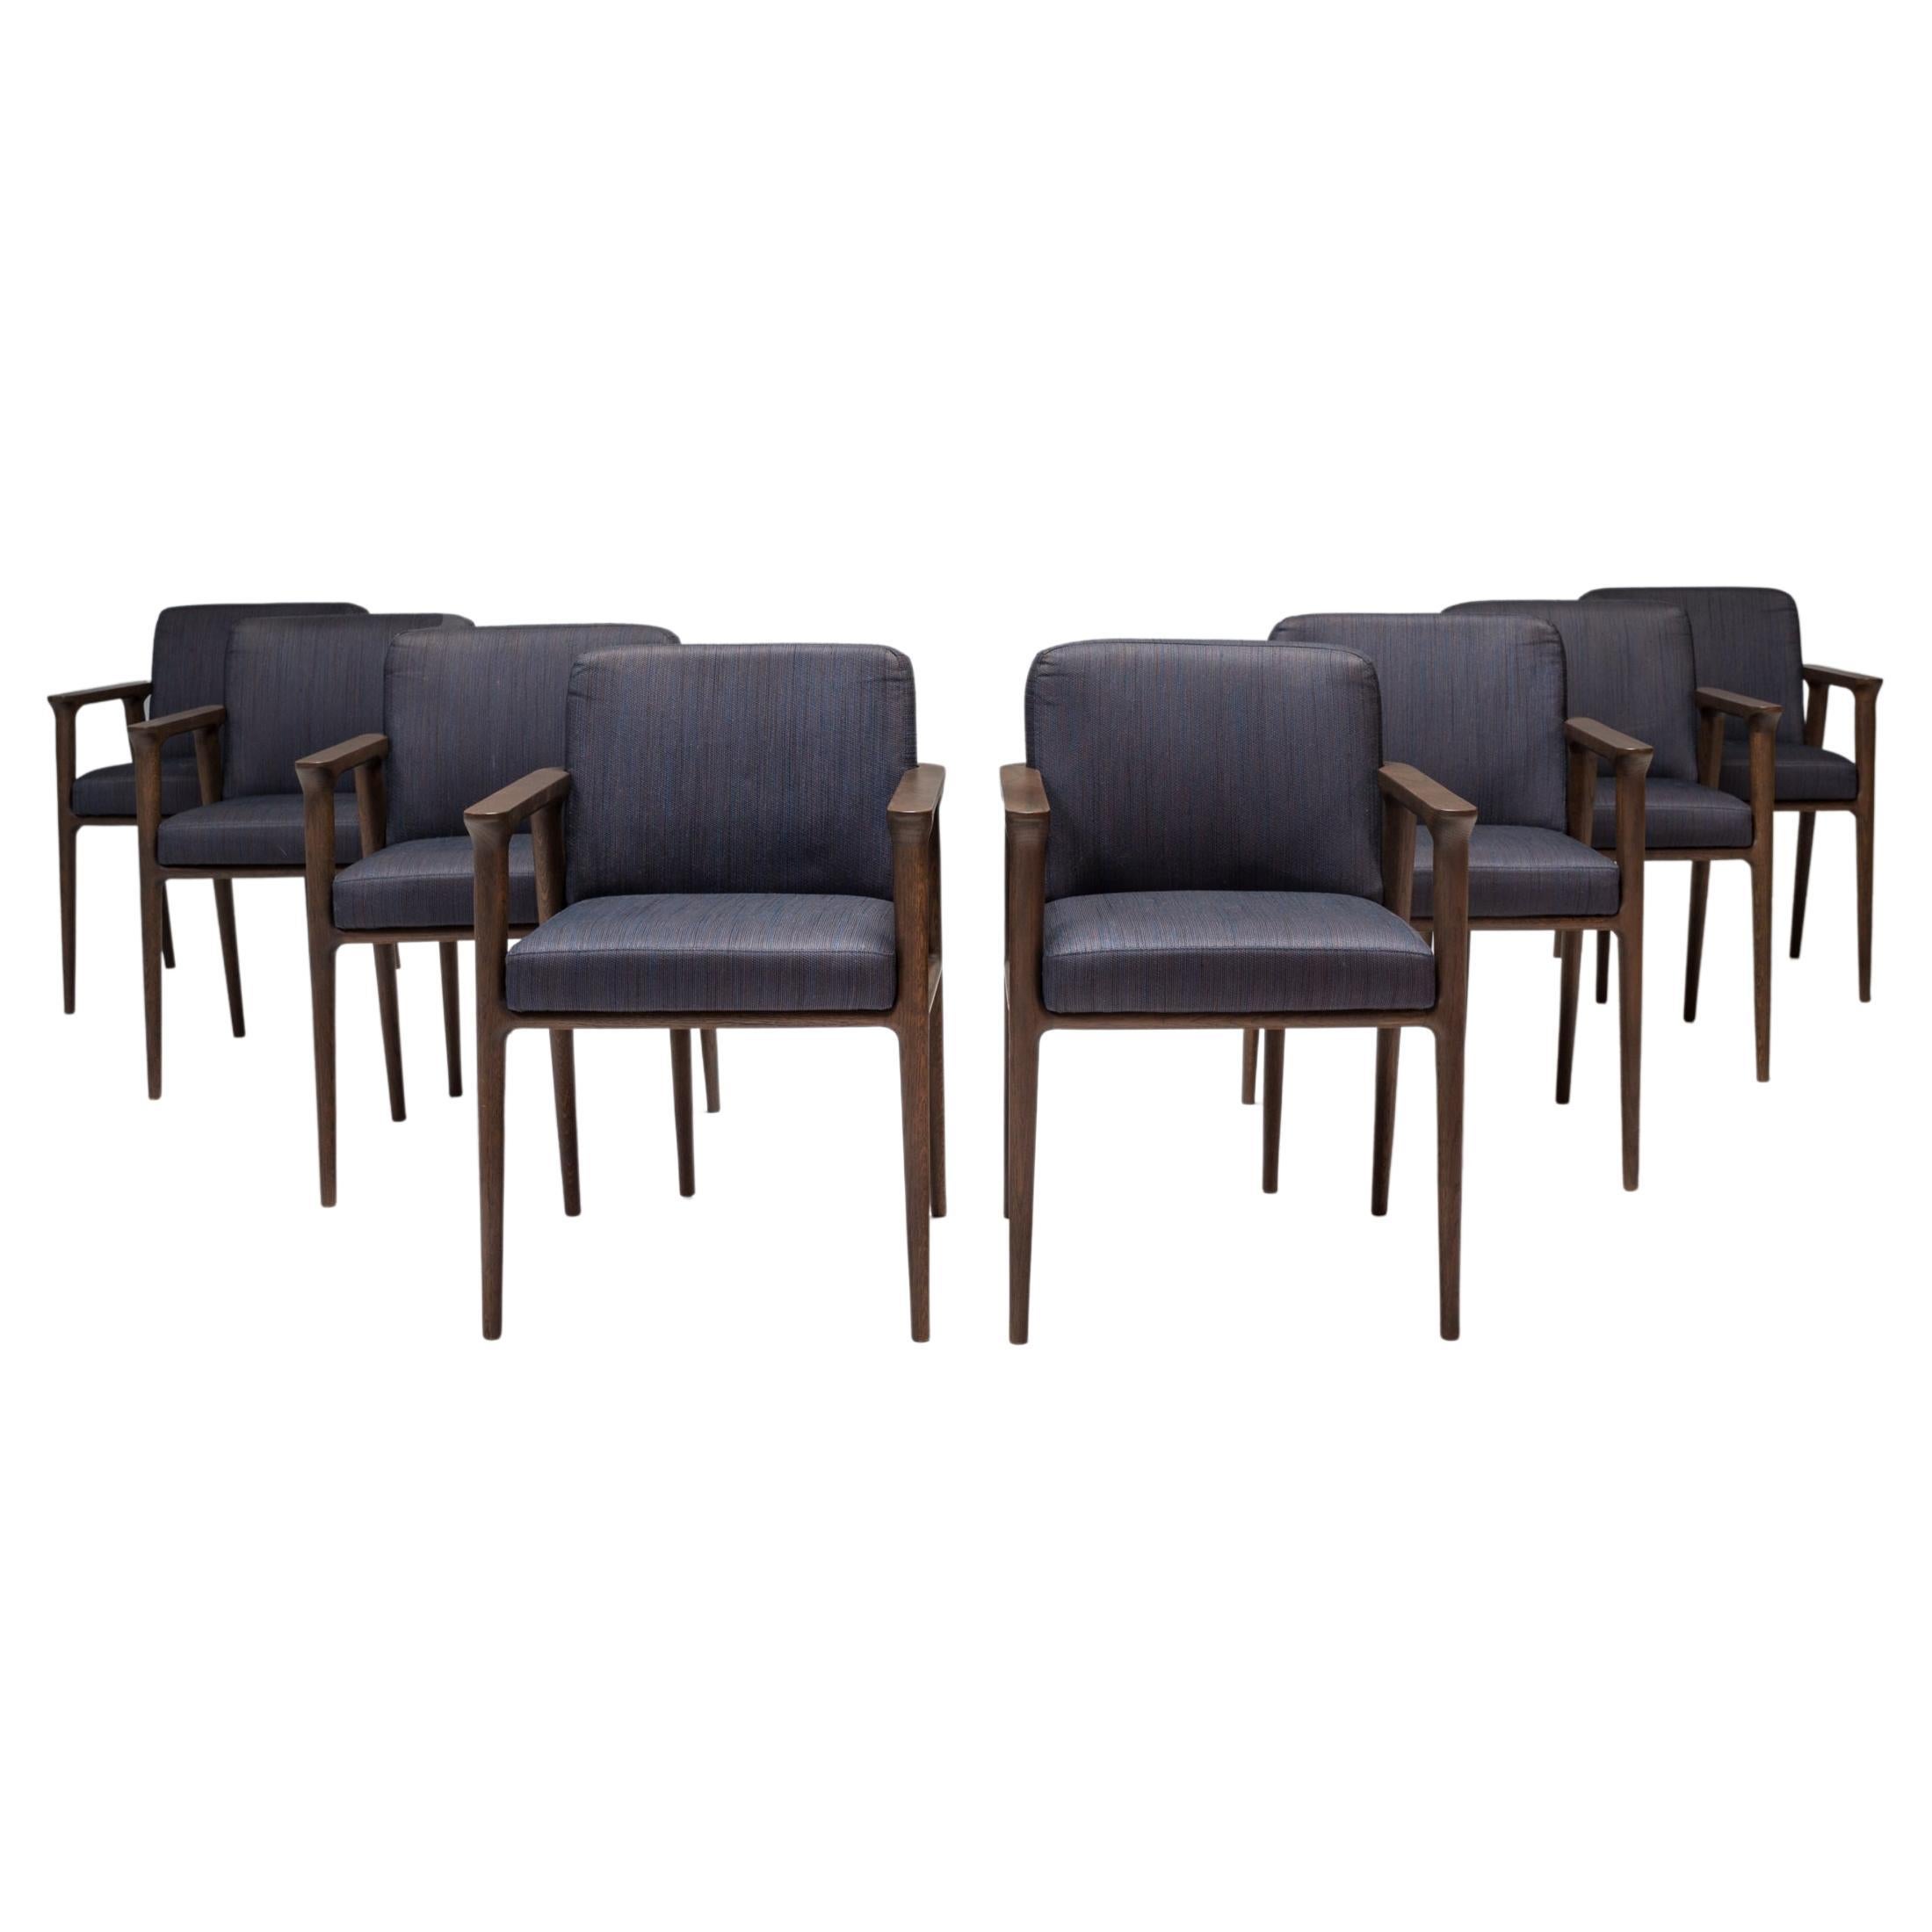 Marcel Wanders for Moooi Zio Wenge Oak Dining Chairs, Set of 8 For Sale